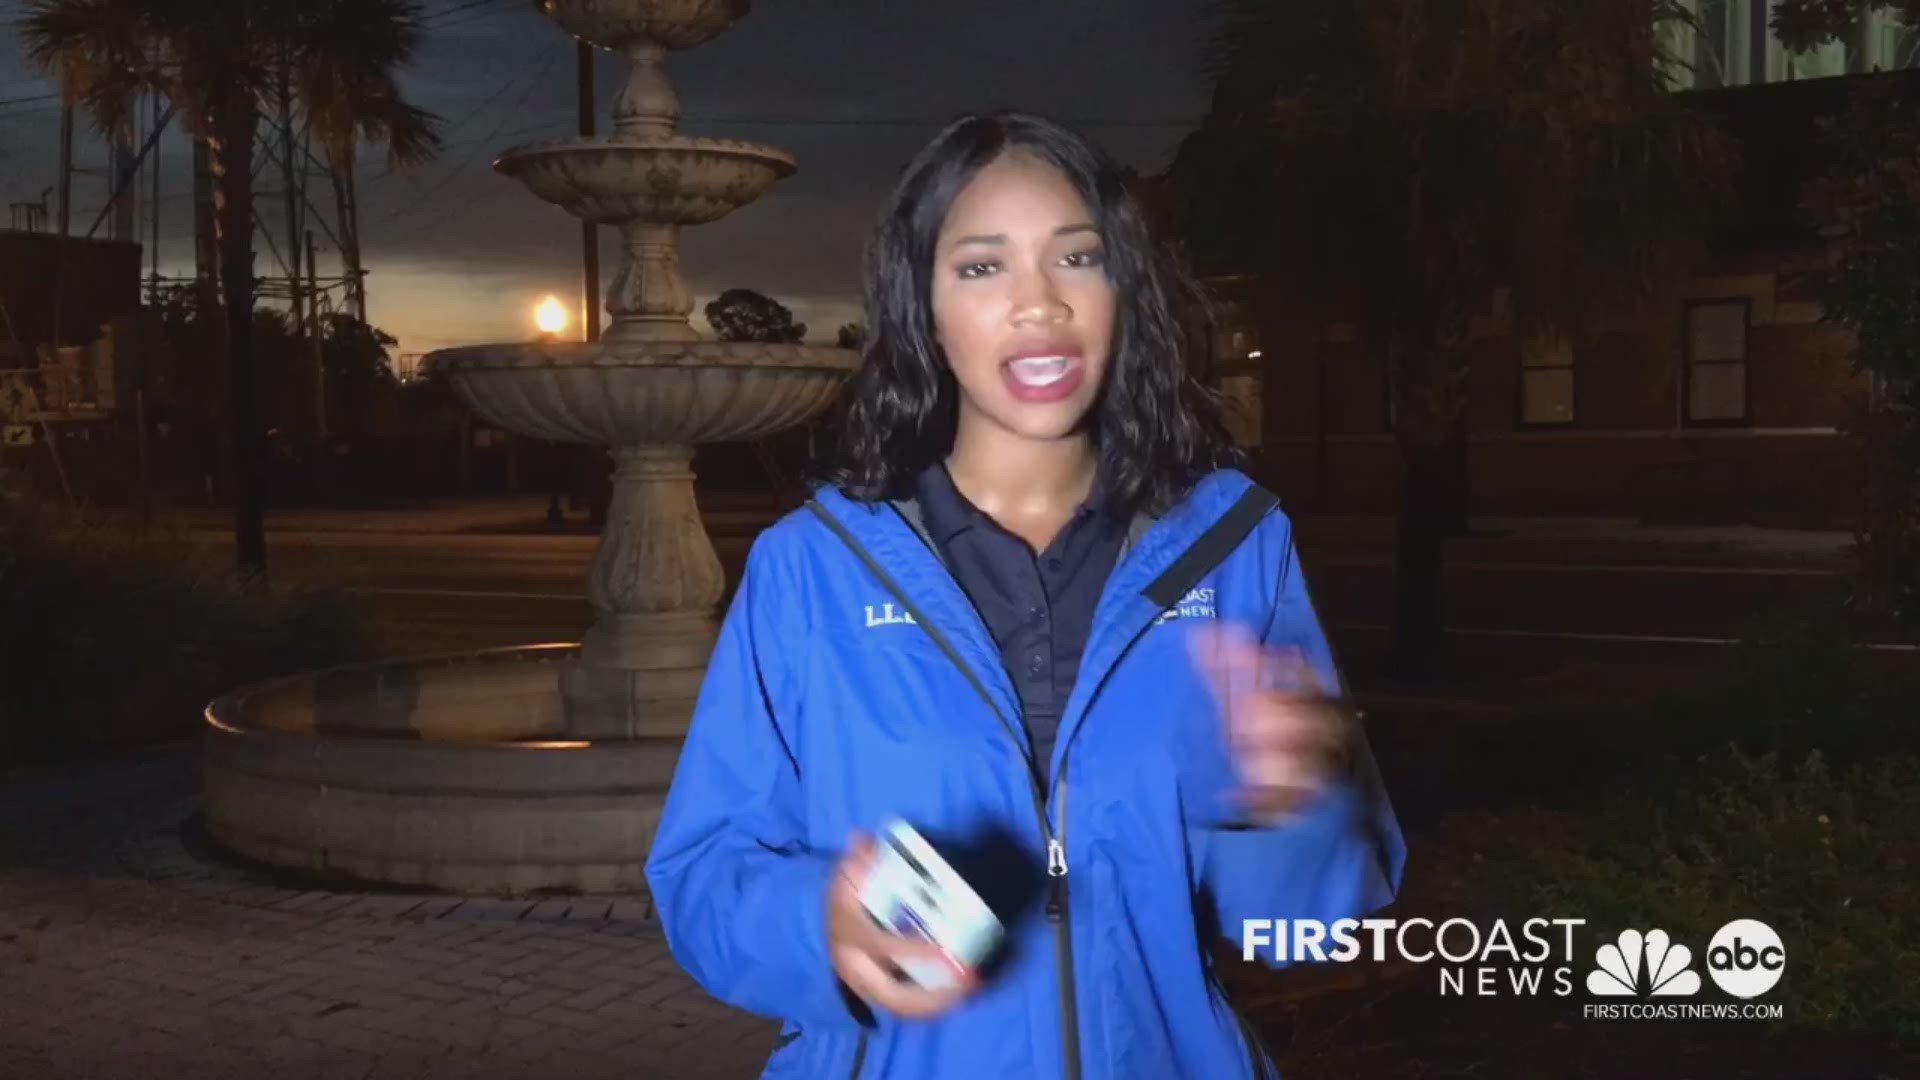 Lana Harris is in Waycross where folks are bracing for a rough couple of days ahead of Hurricane Michael. It's going to be primarily a wind event with possible tornadoes and damaging wind gusts.